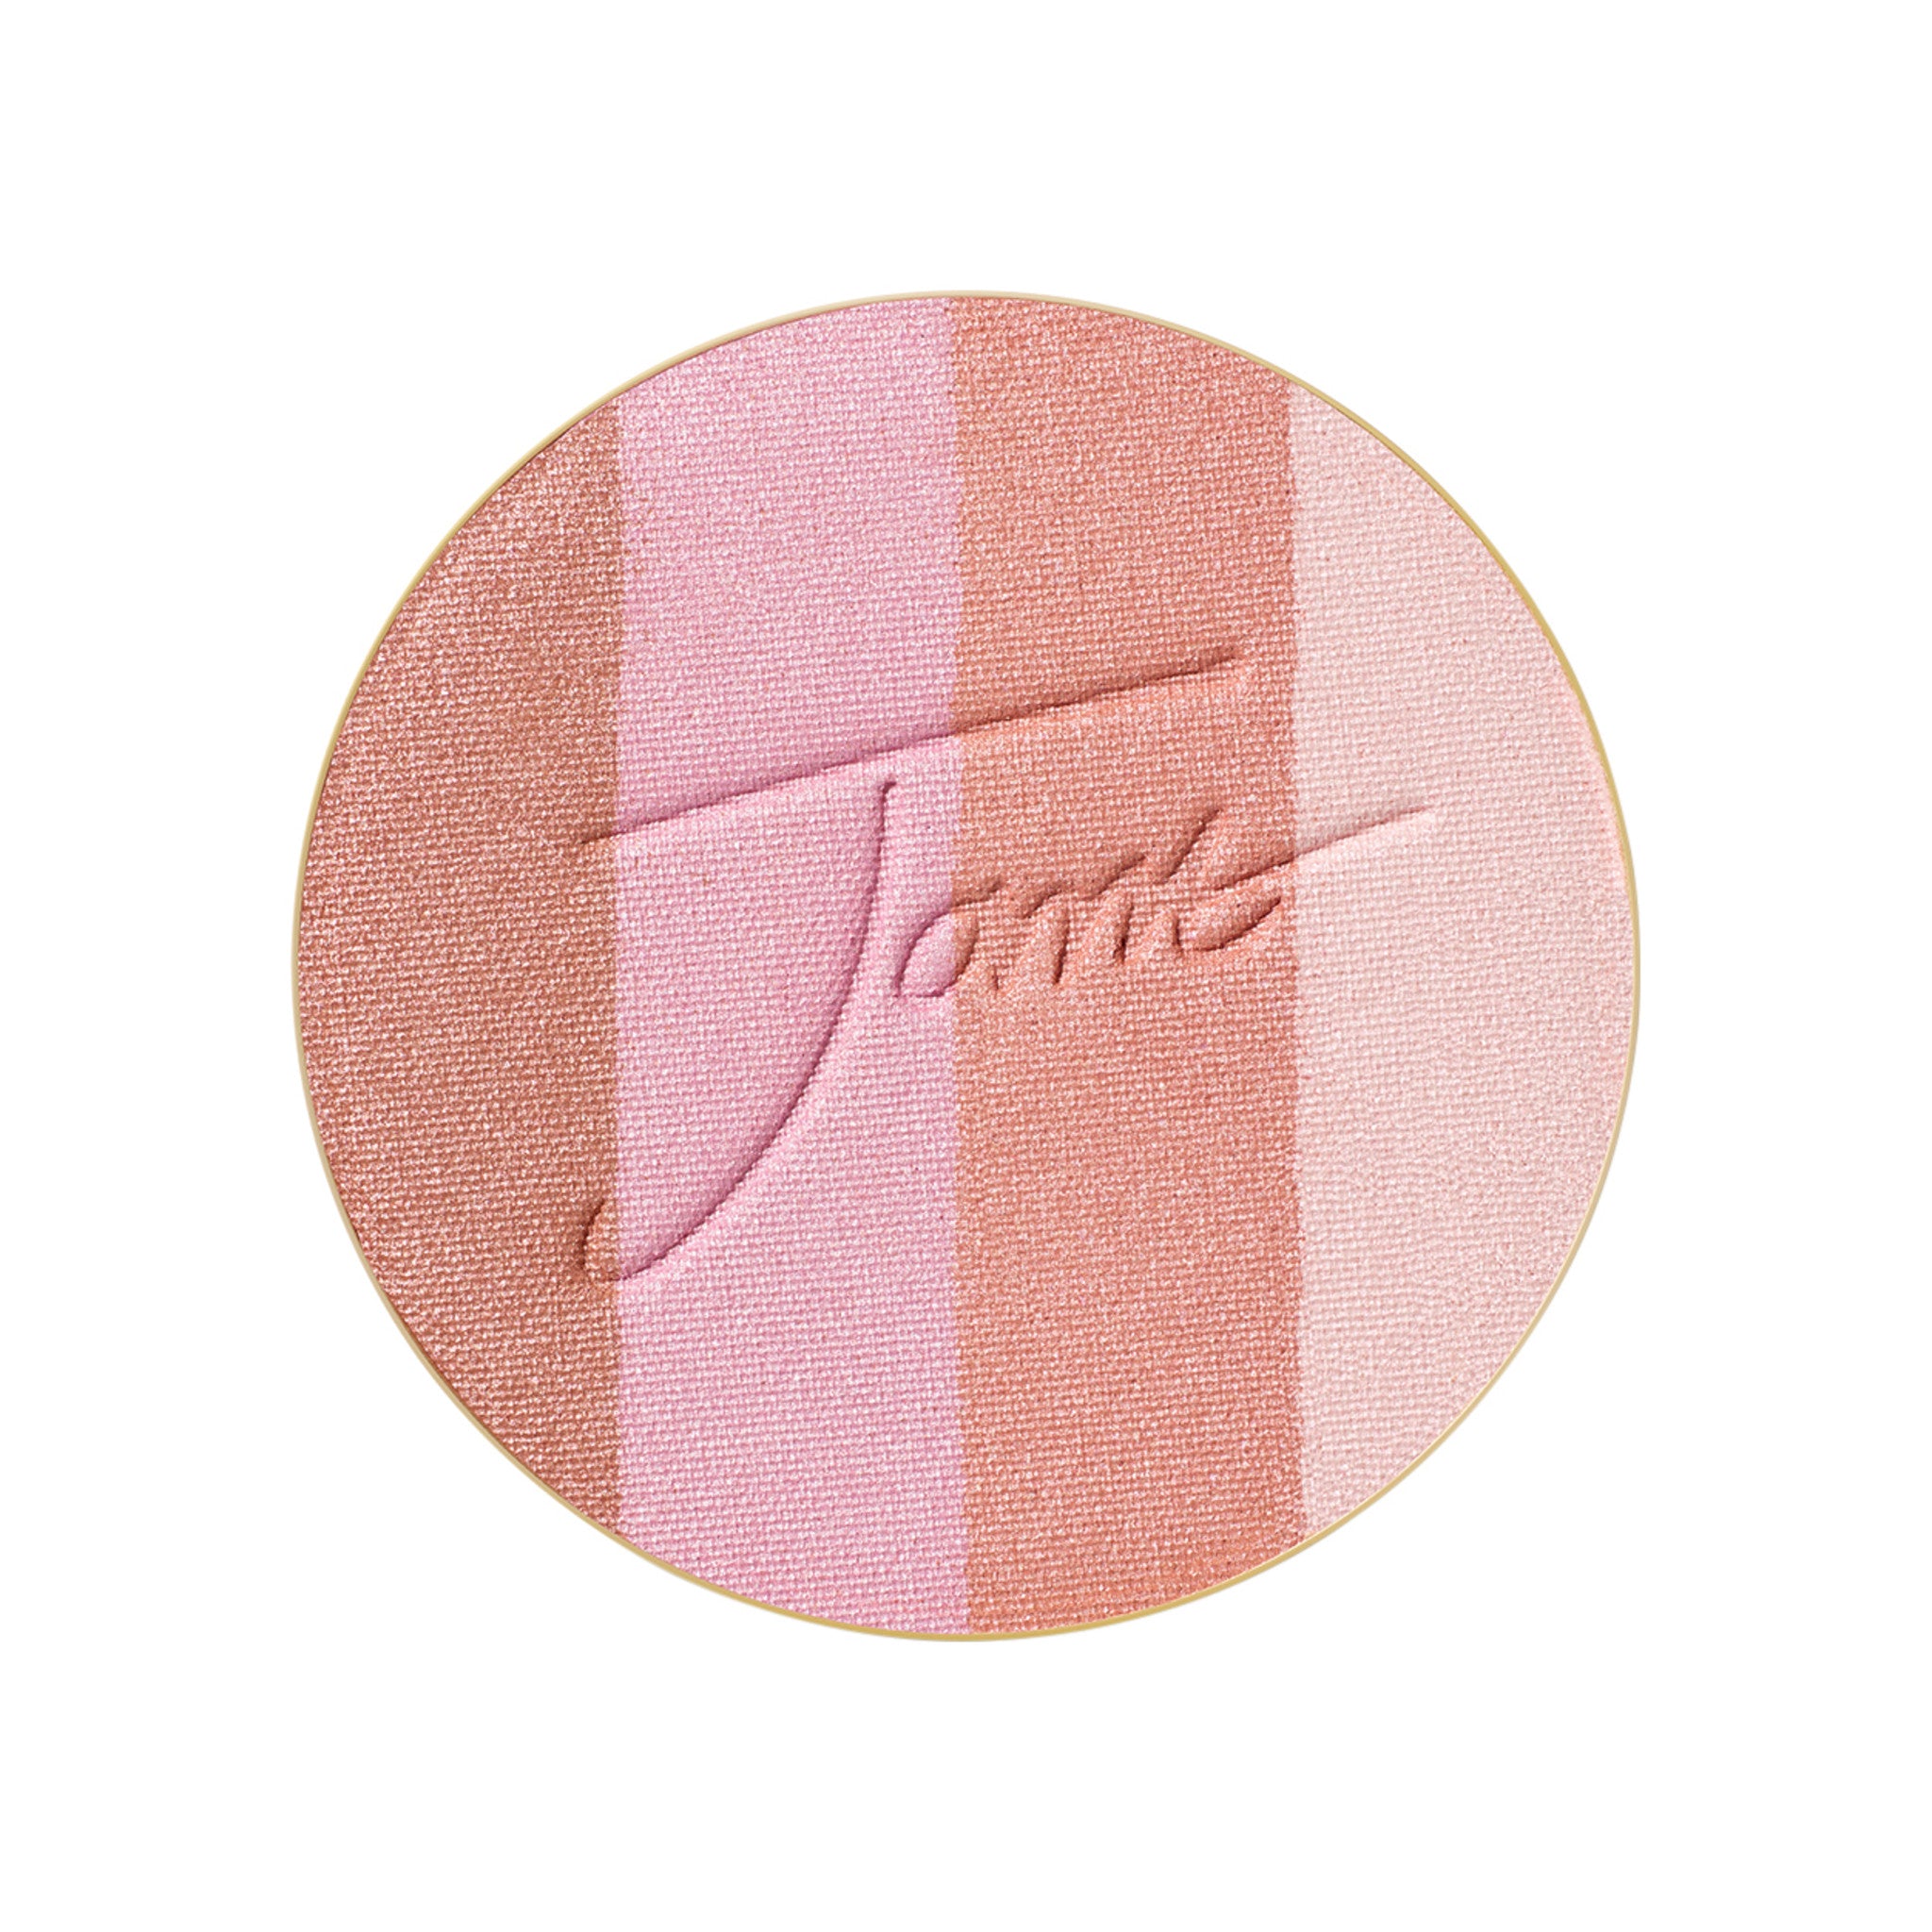 Jane Iredale PureBronze Shimmer Bronzer Refill Color/Shade variant: Rose Dawn main image.